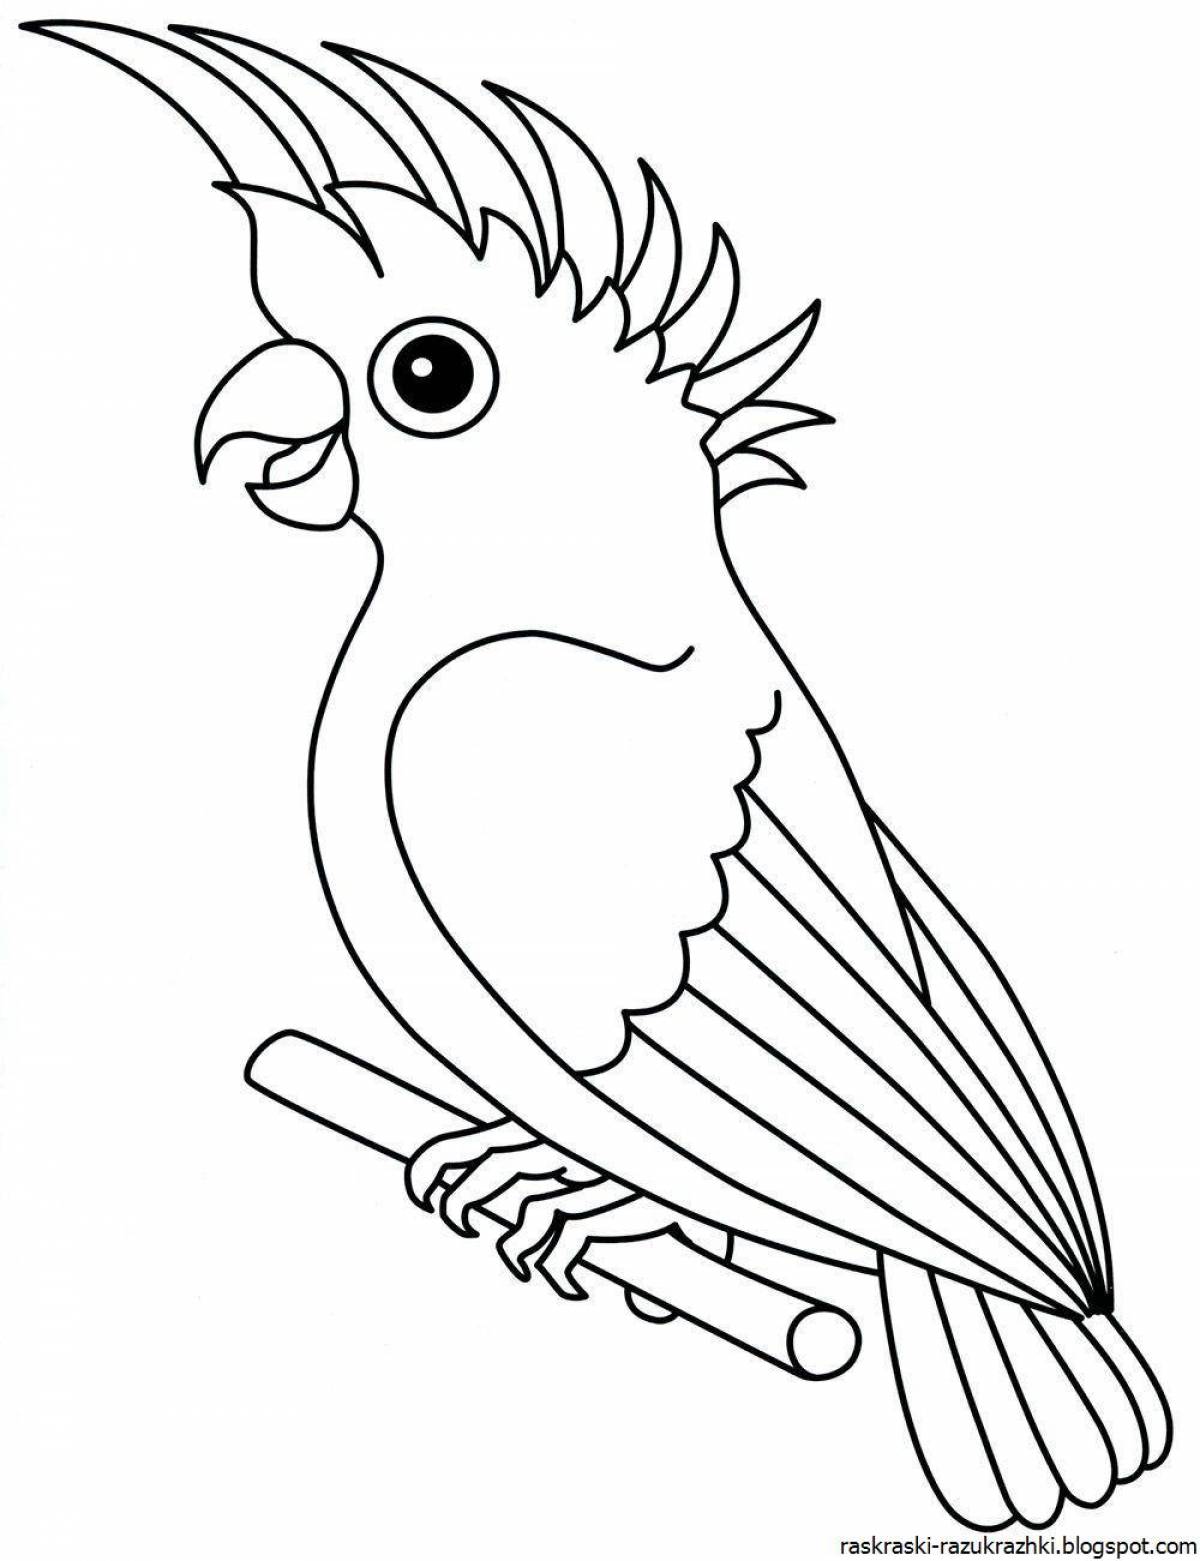 Adorable bird coloring book for 6-7 year olds